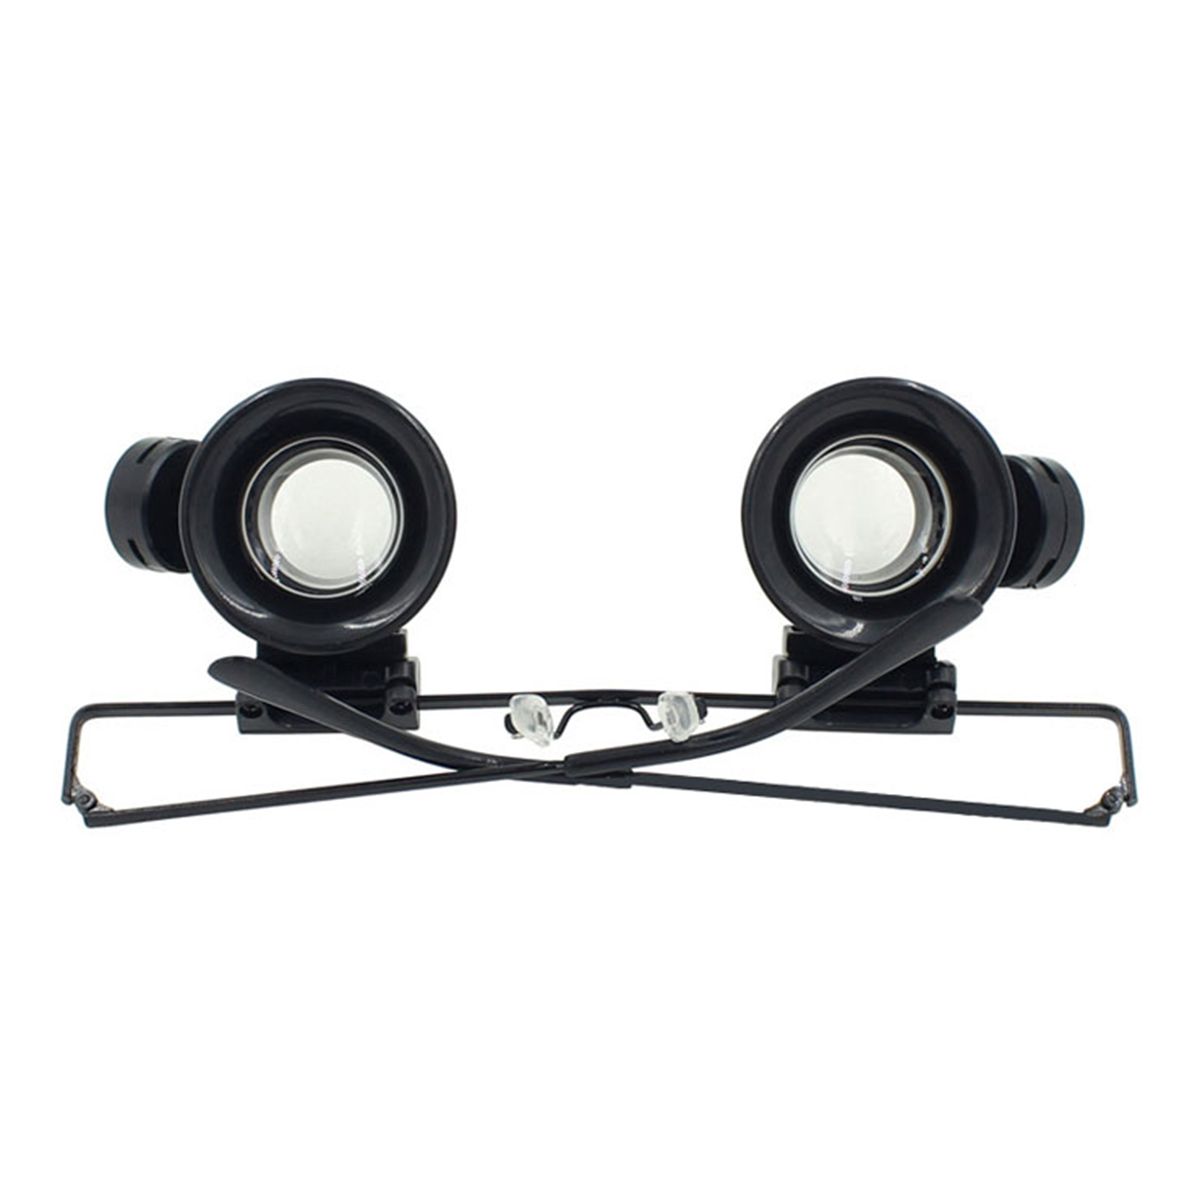 LED-20X-Magnifier-Magnifying-Dual-Eye-Glasses-Loupe-Lens-Jeweler-Watch-Repair-1625713